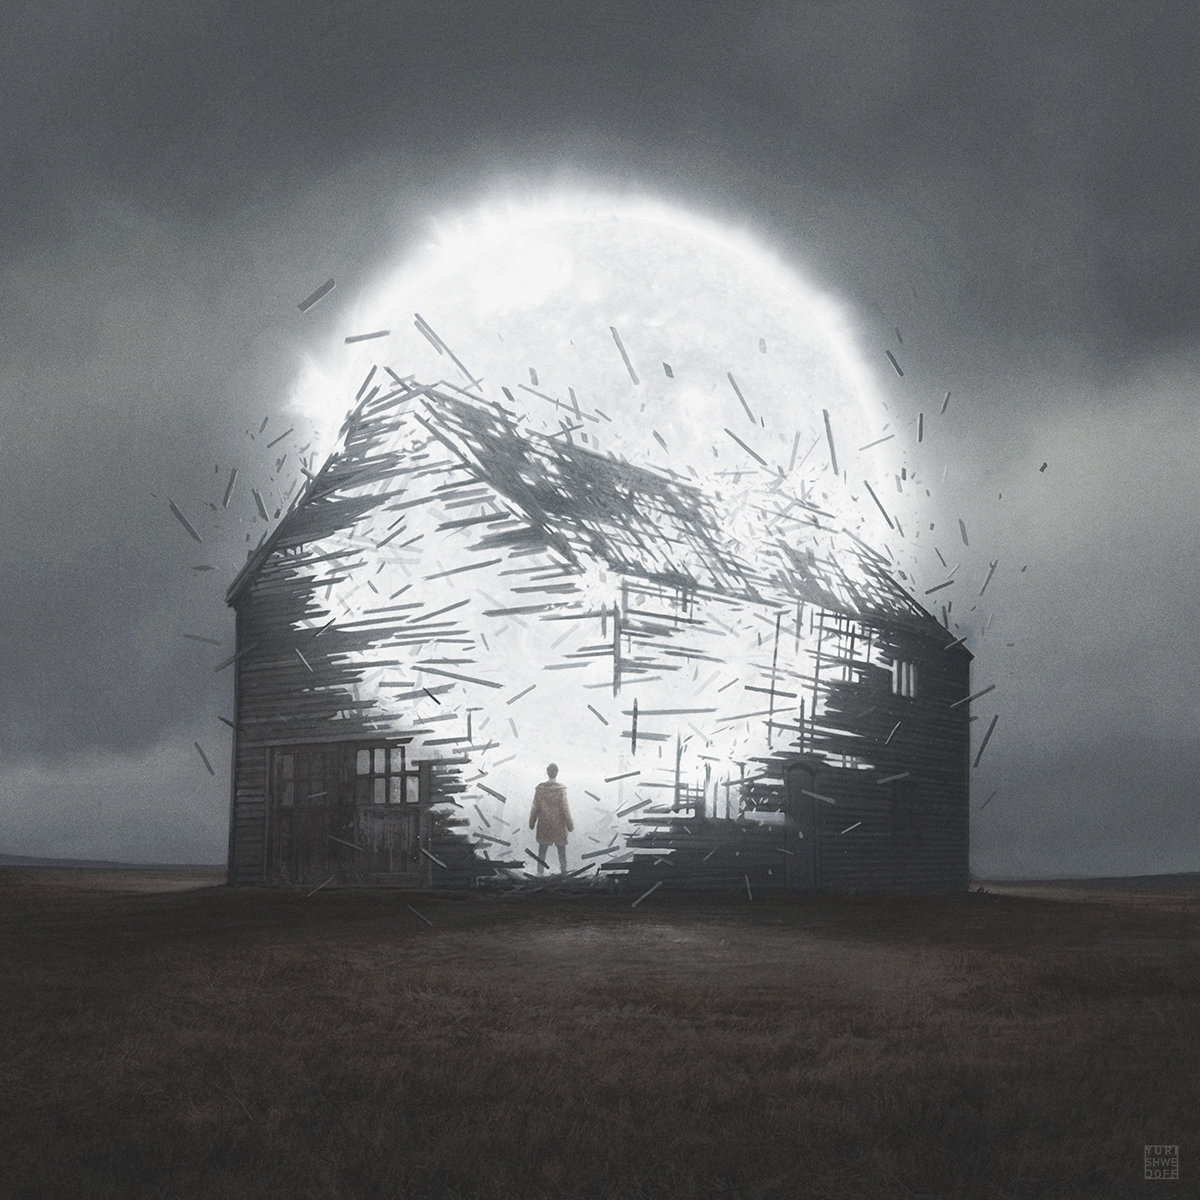 [Reflexion] Les oeuvres qui vous inspirent - Page 2 Yuri-shwedoff-star-internet